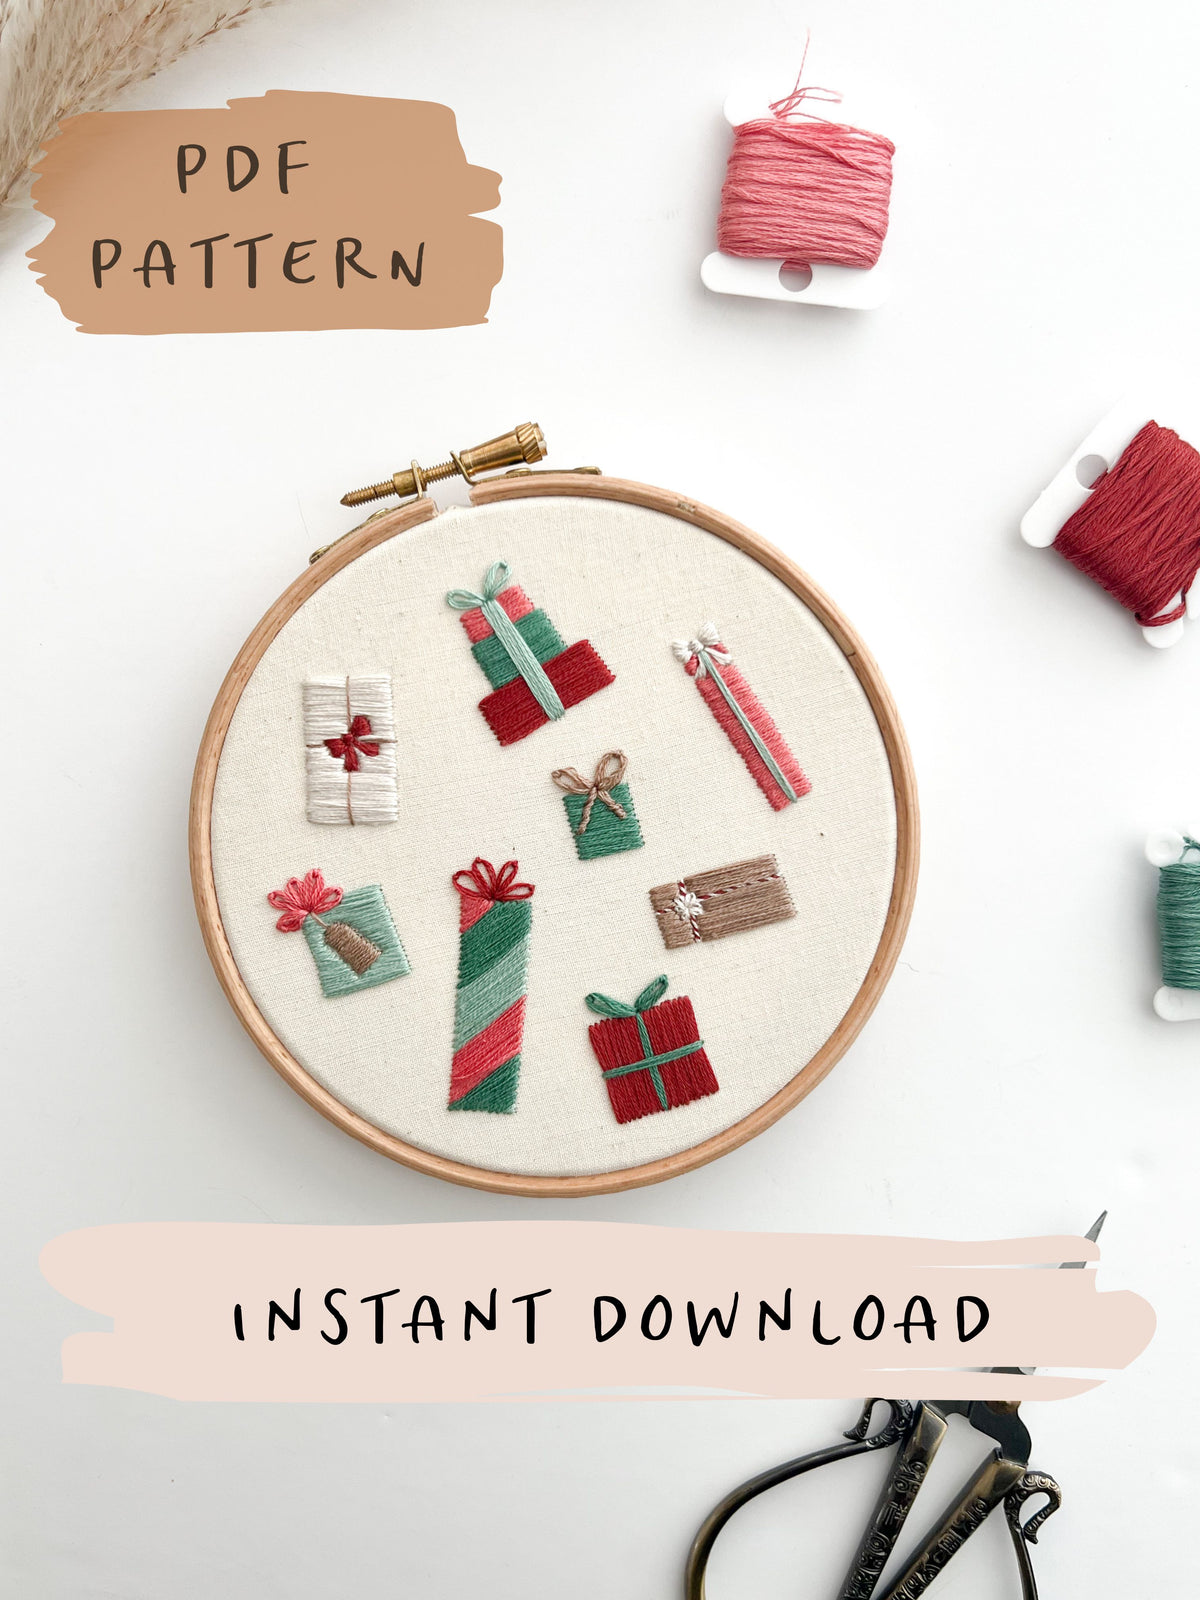 Christmas Embroidery Transfers (Other)